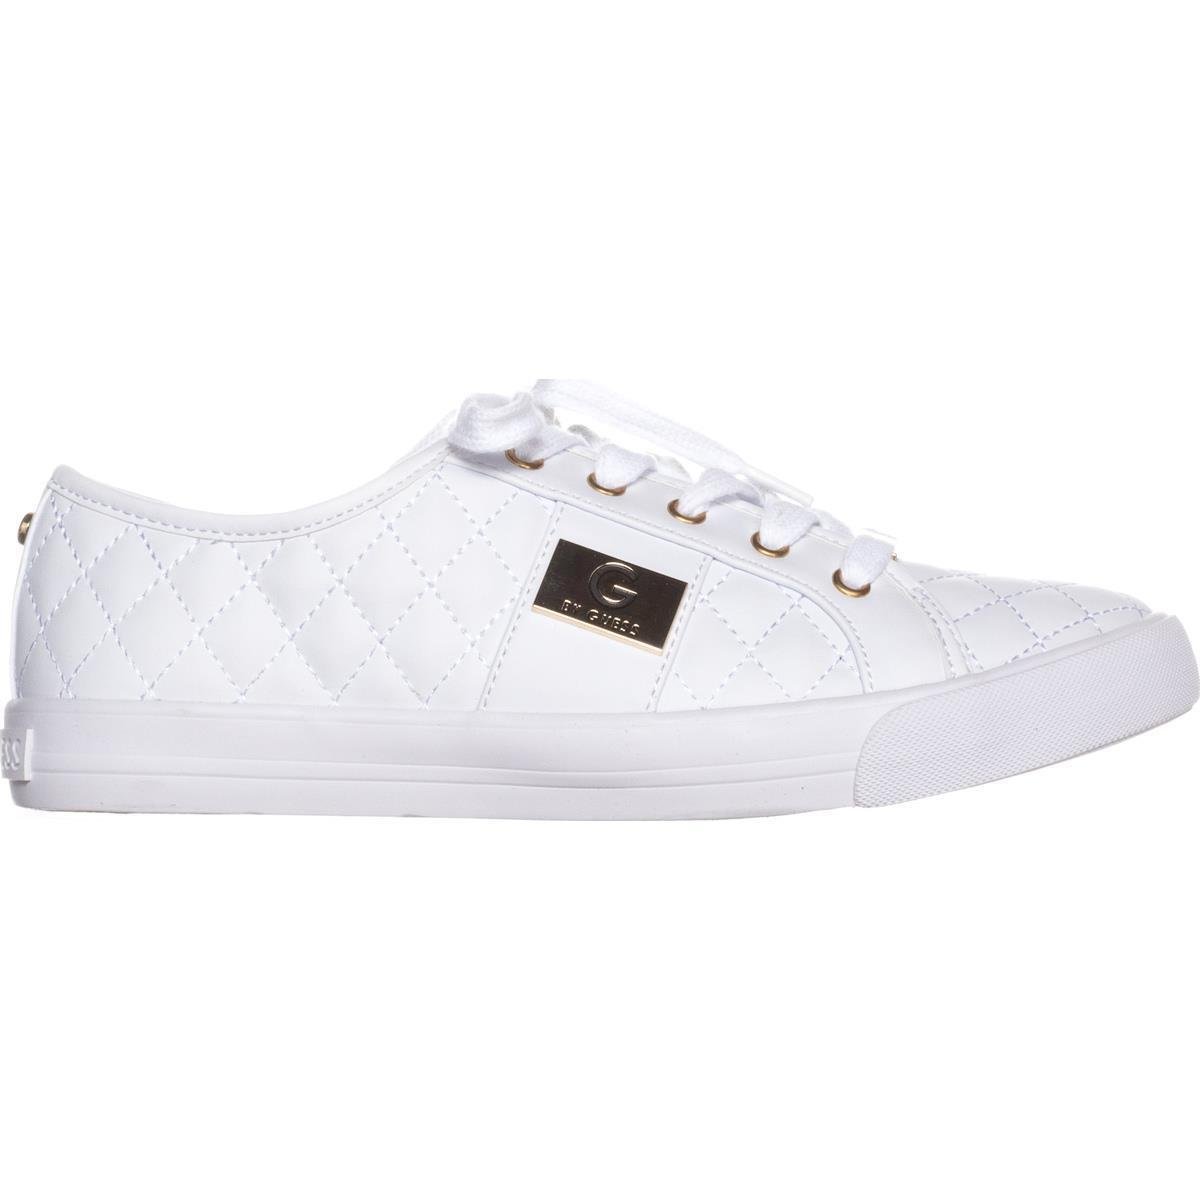 G by Guess Womens Backer2 Low Top Lace Up Fashion Sneakers, White, Size ...